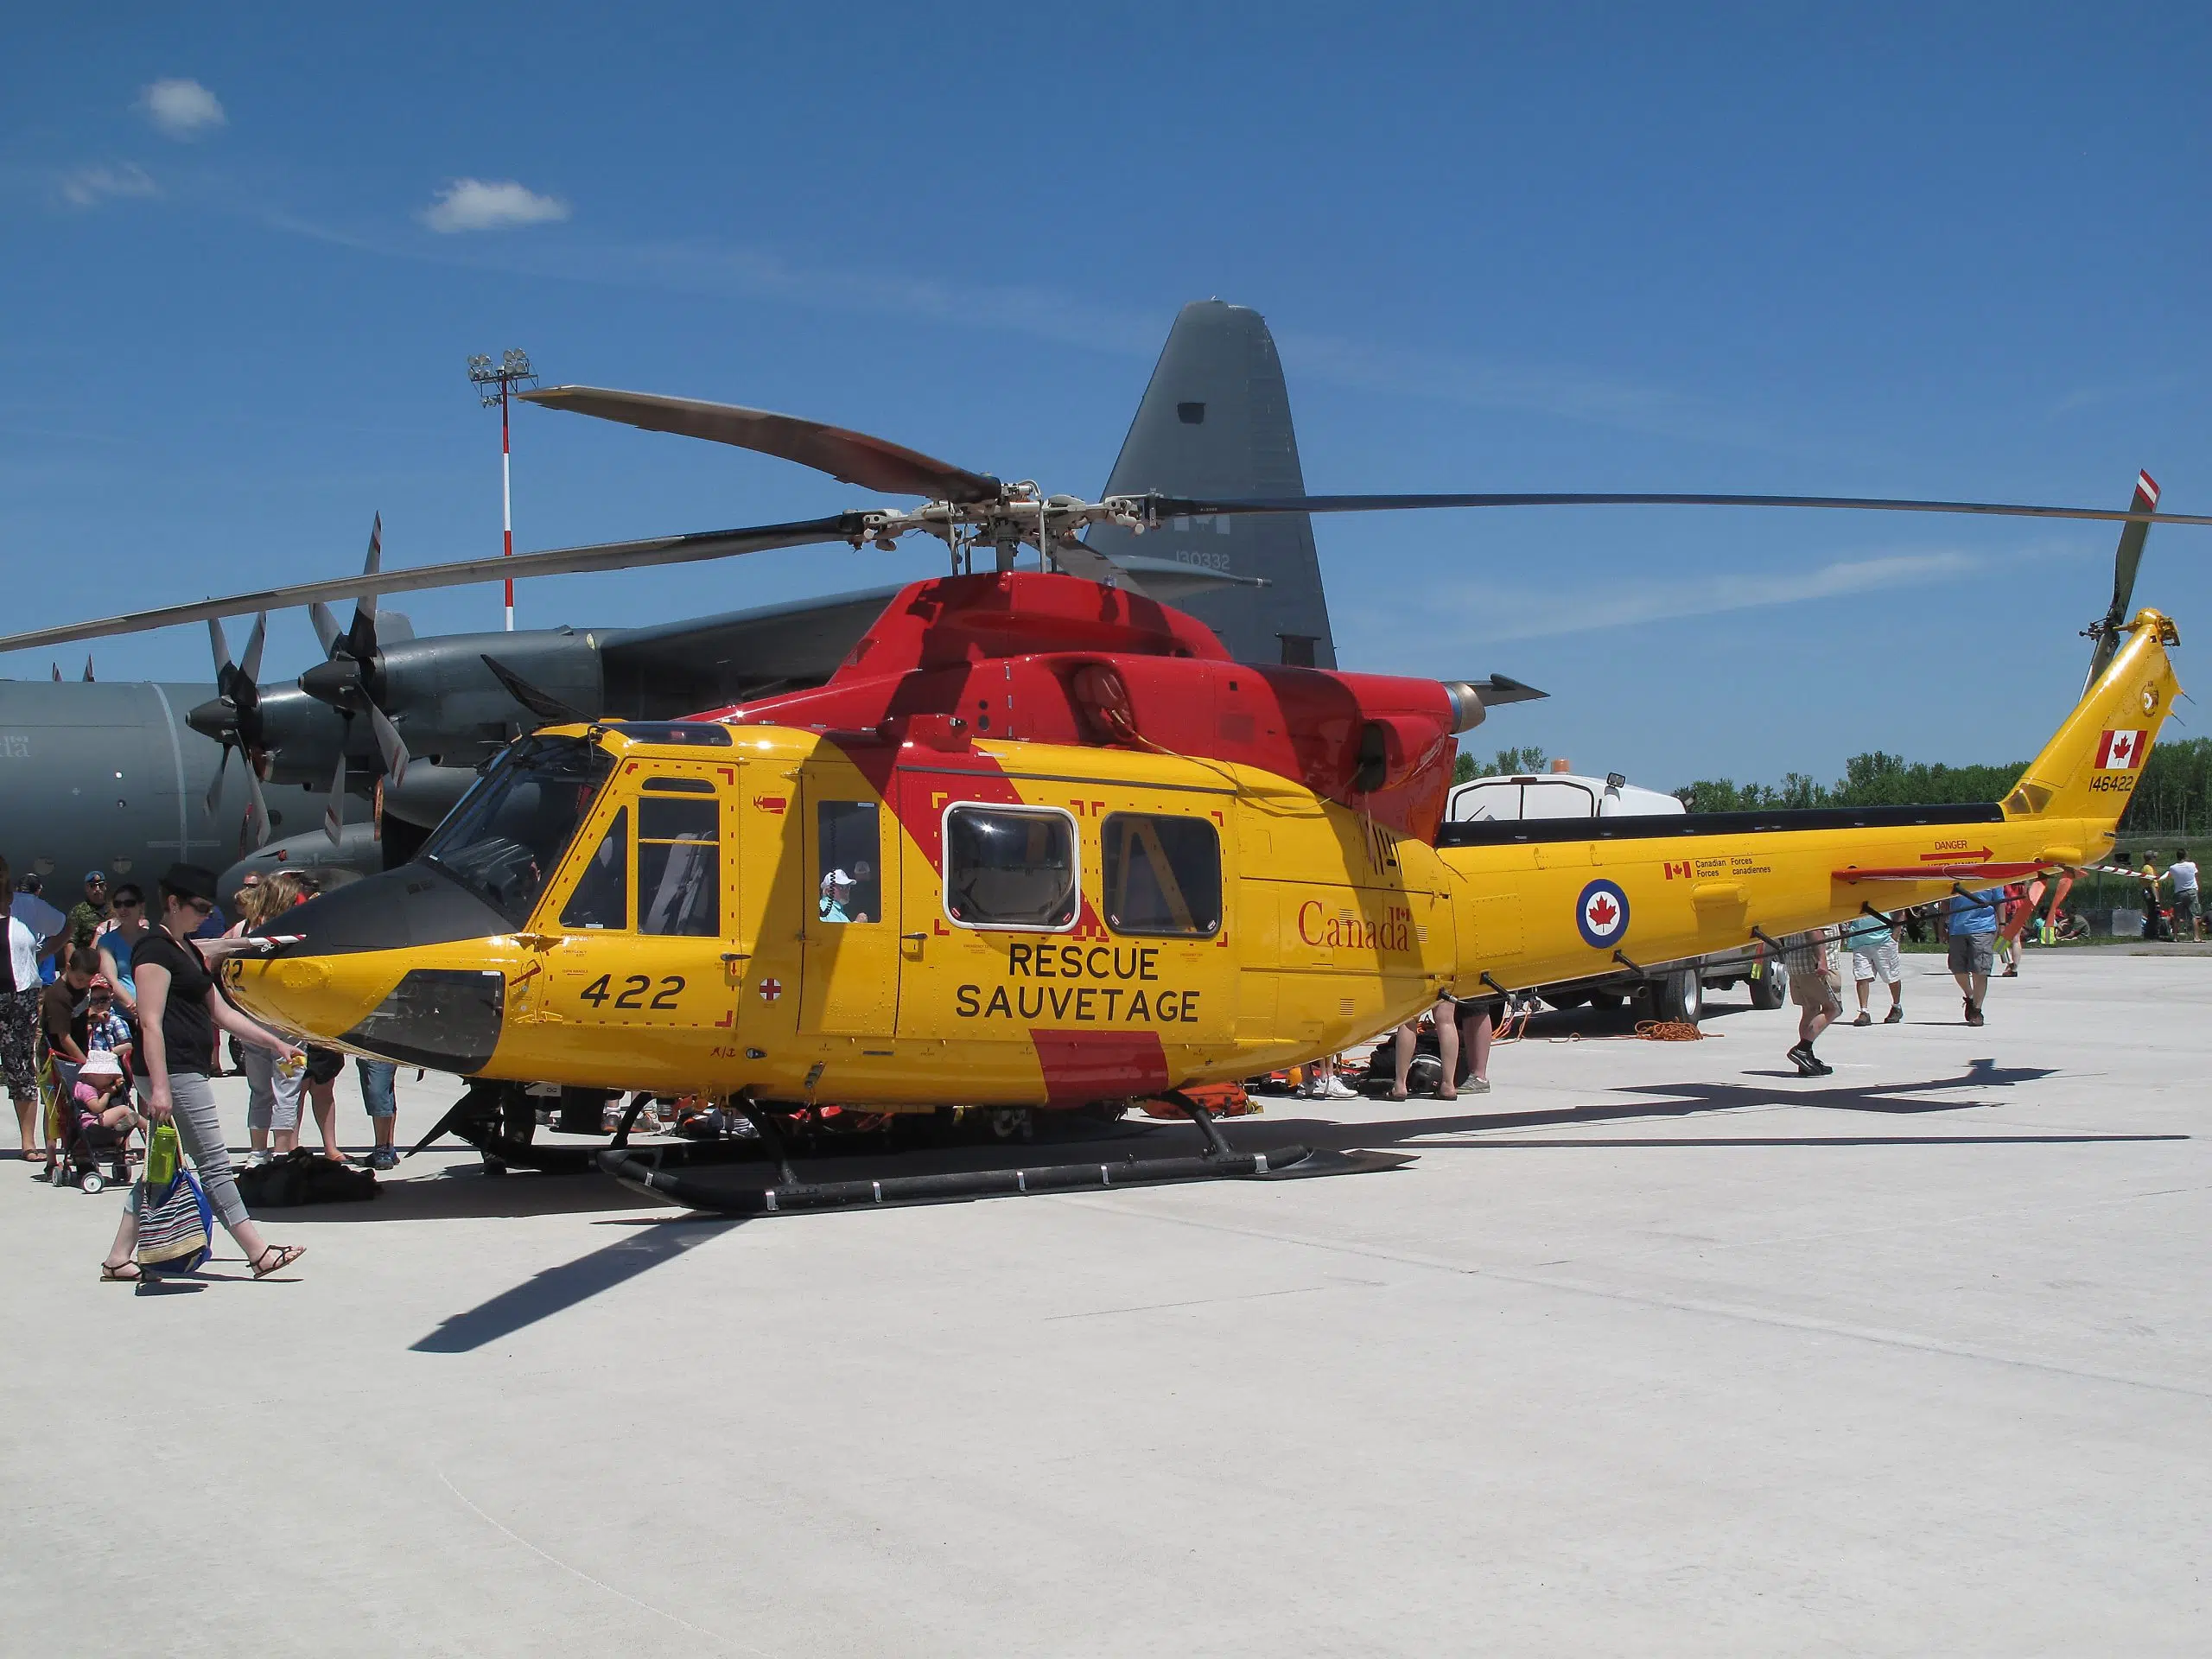 424 Squadron assists in medical evacuation